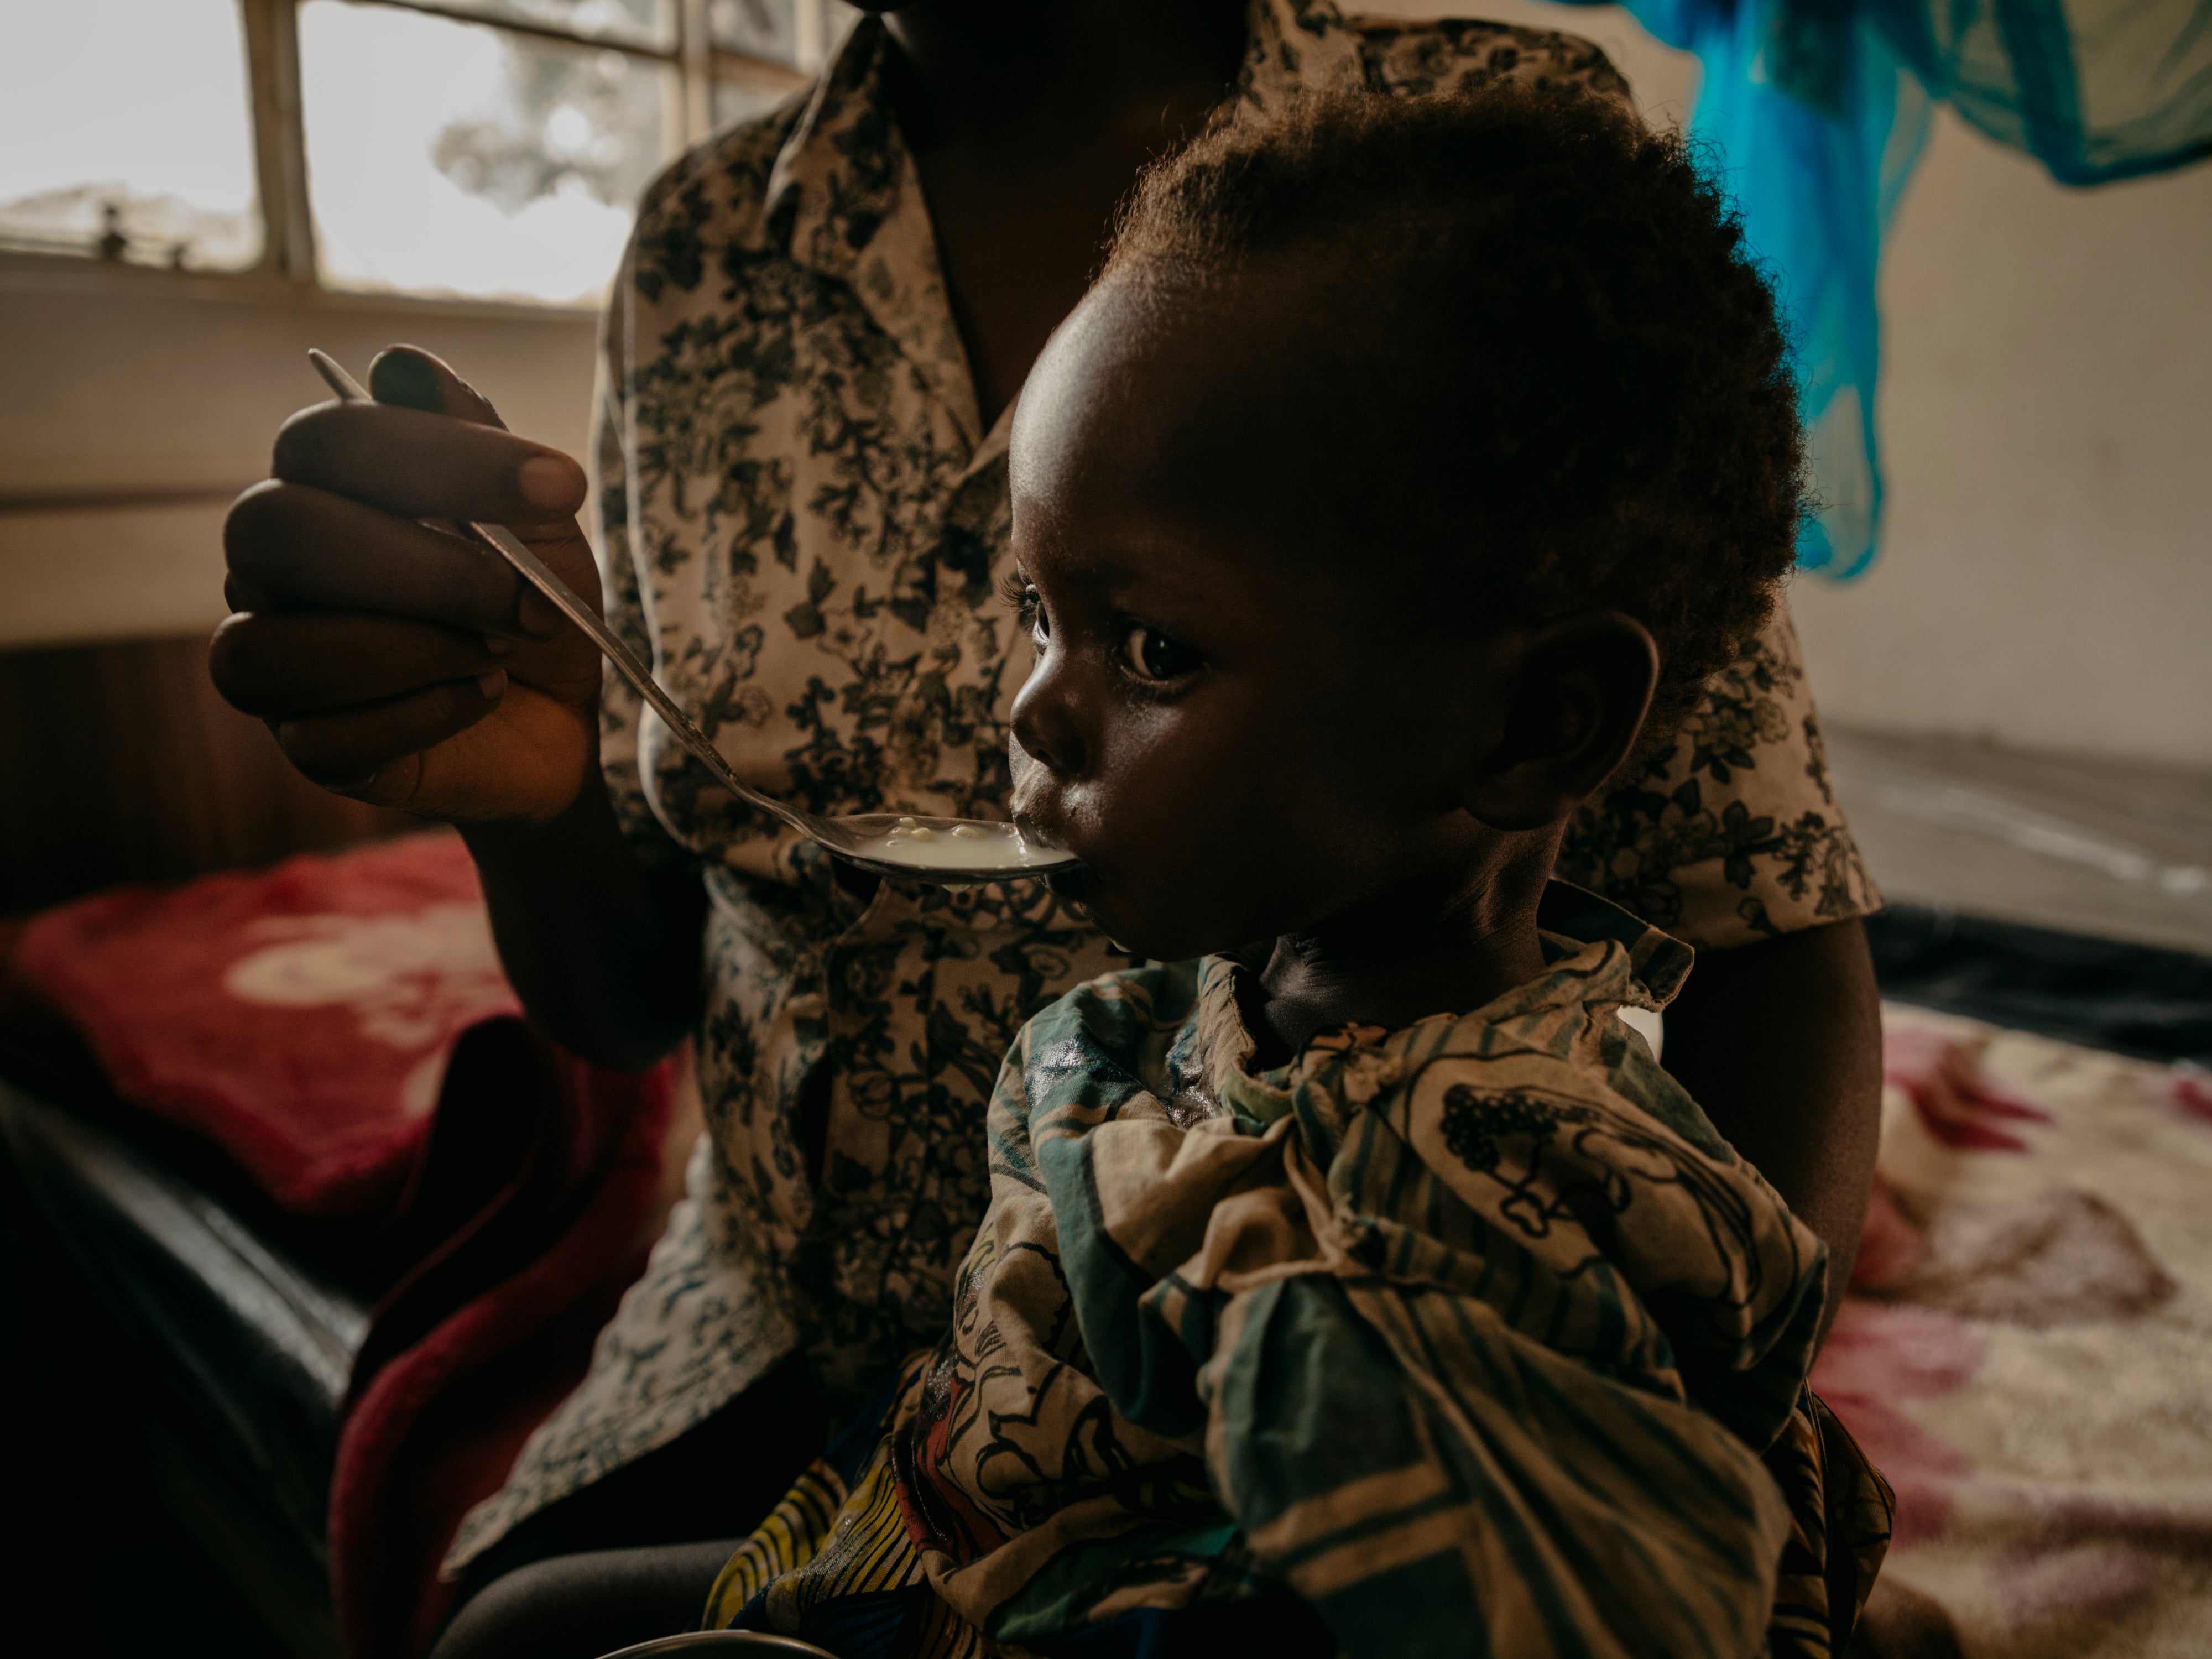 Her one-year-old baby daughter Eloise* receives treatment for malnutrition